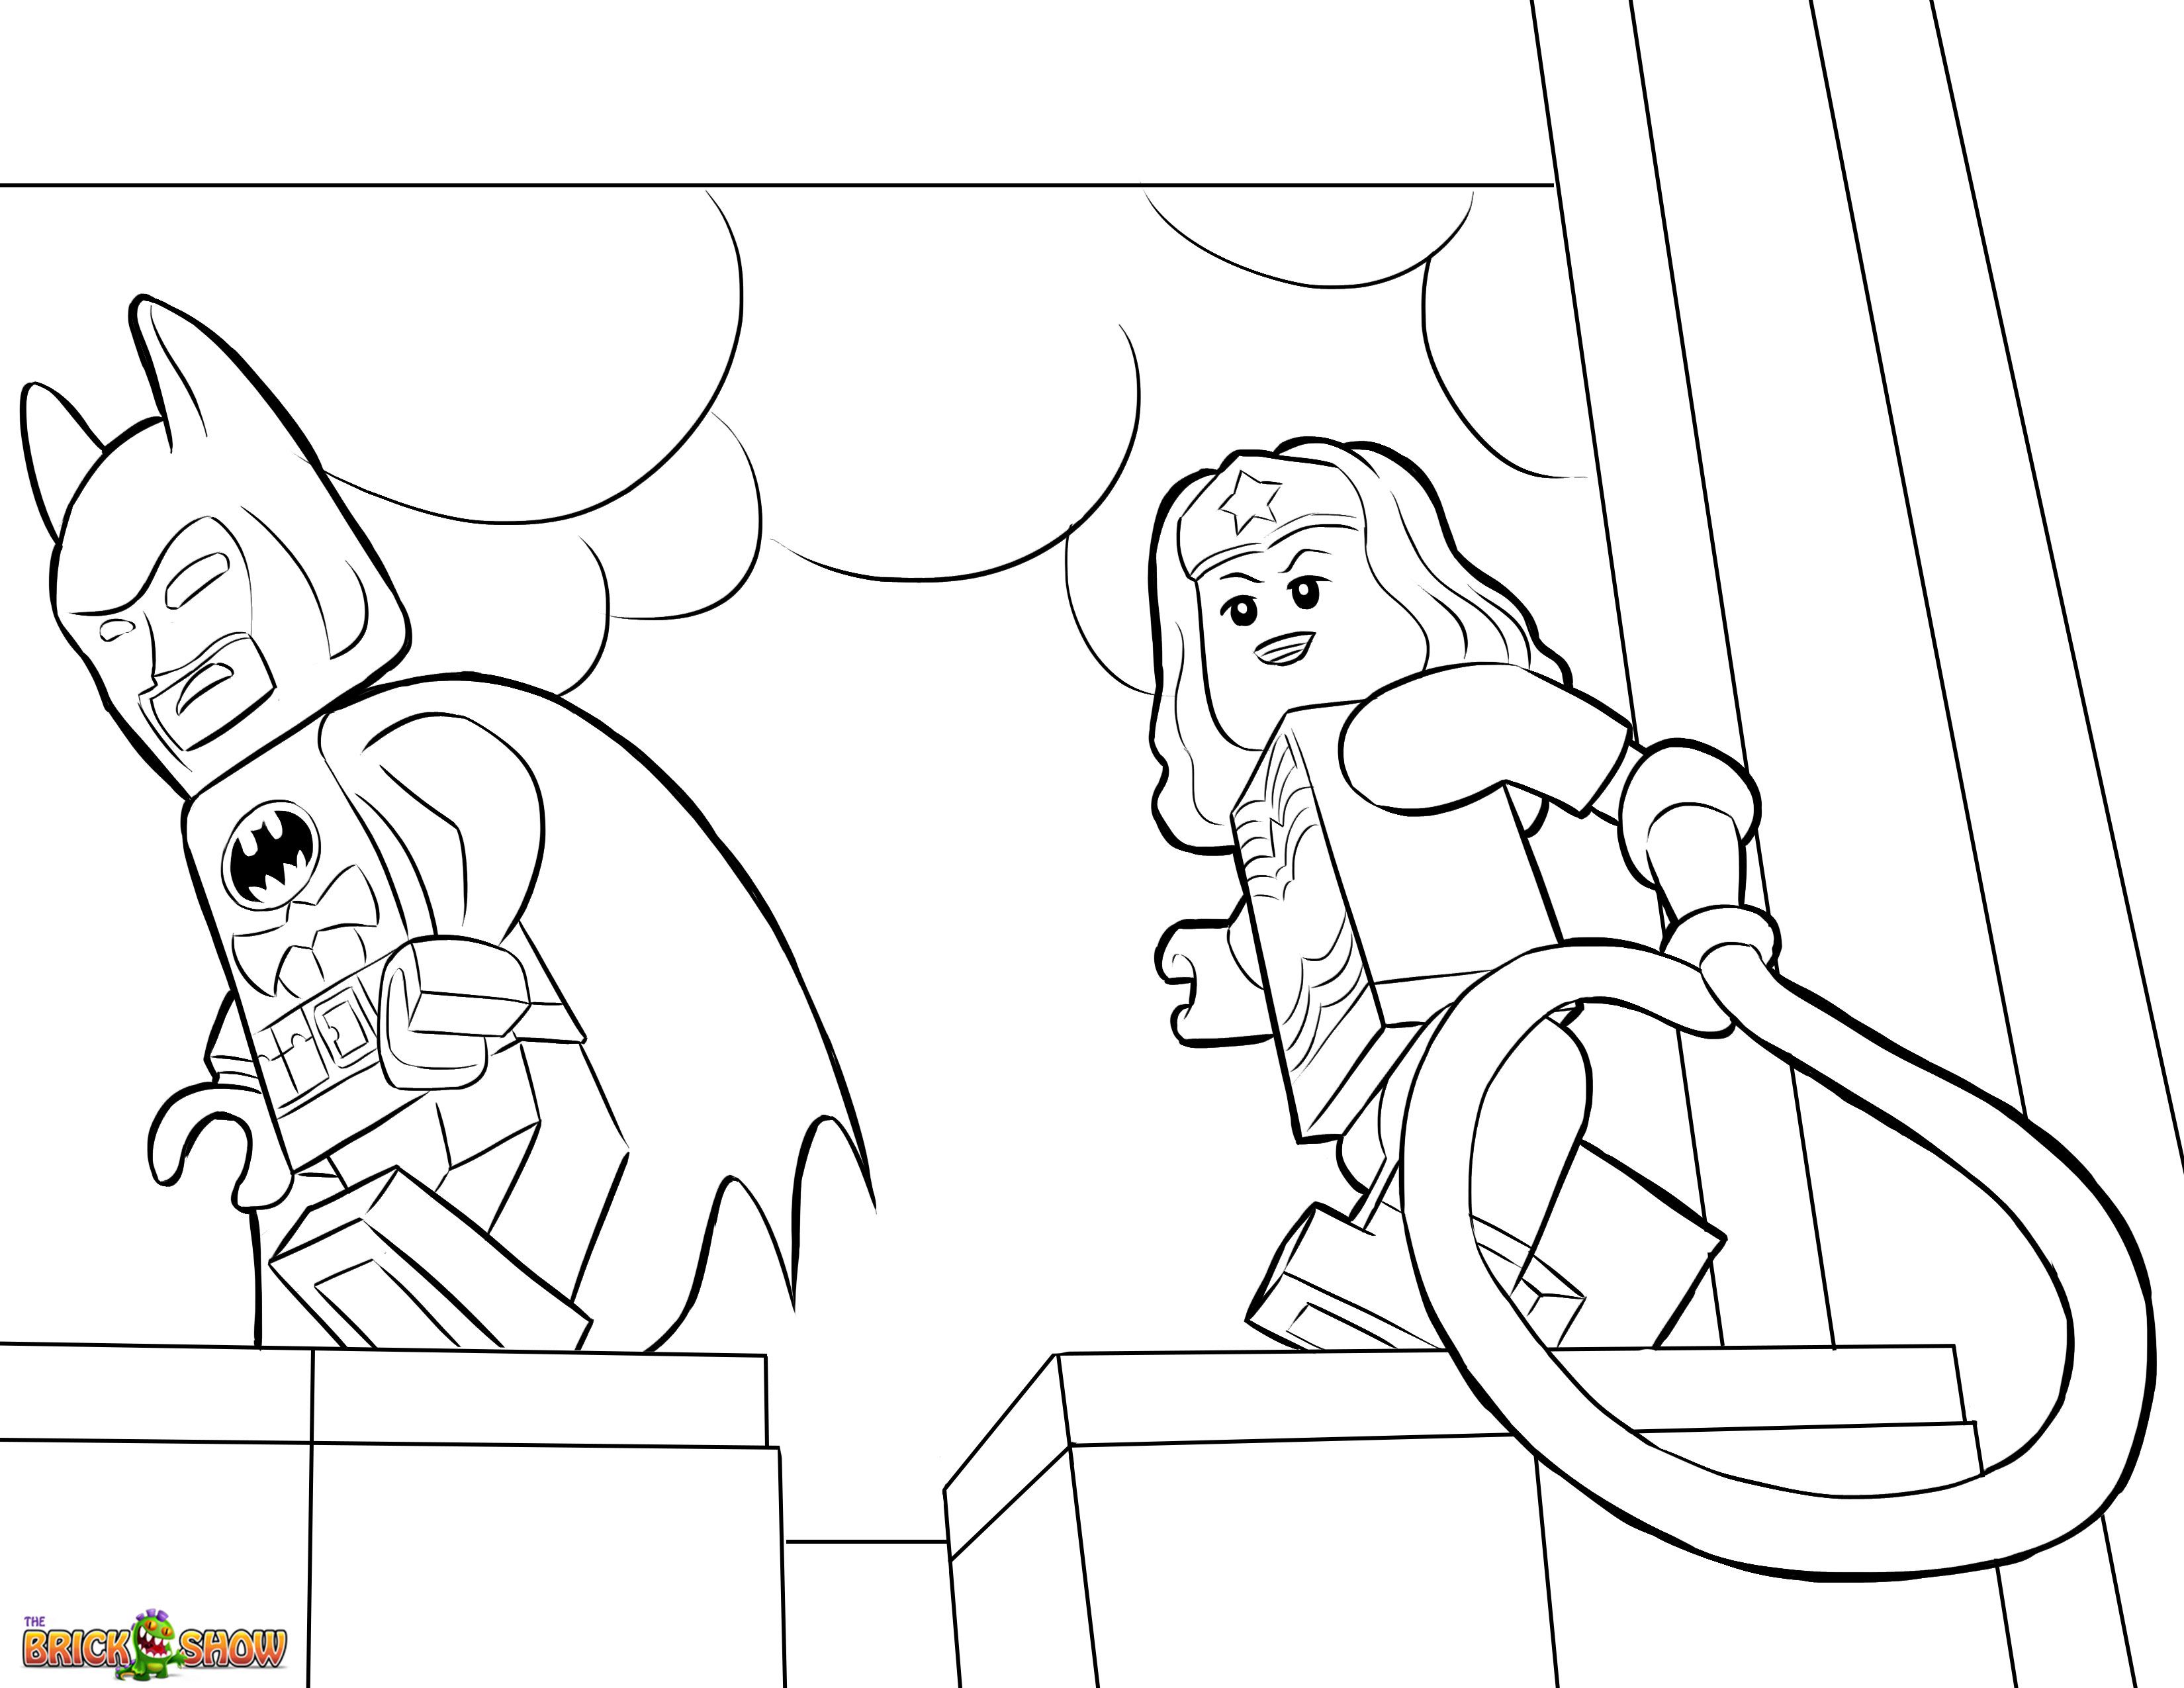 Lego Movie Characters Coloring Pages at GetDrawings | Free ...